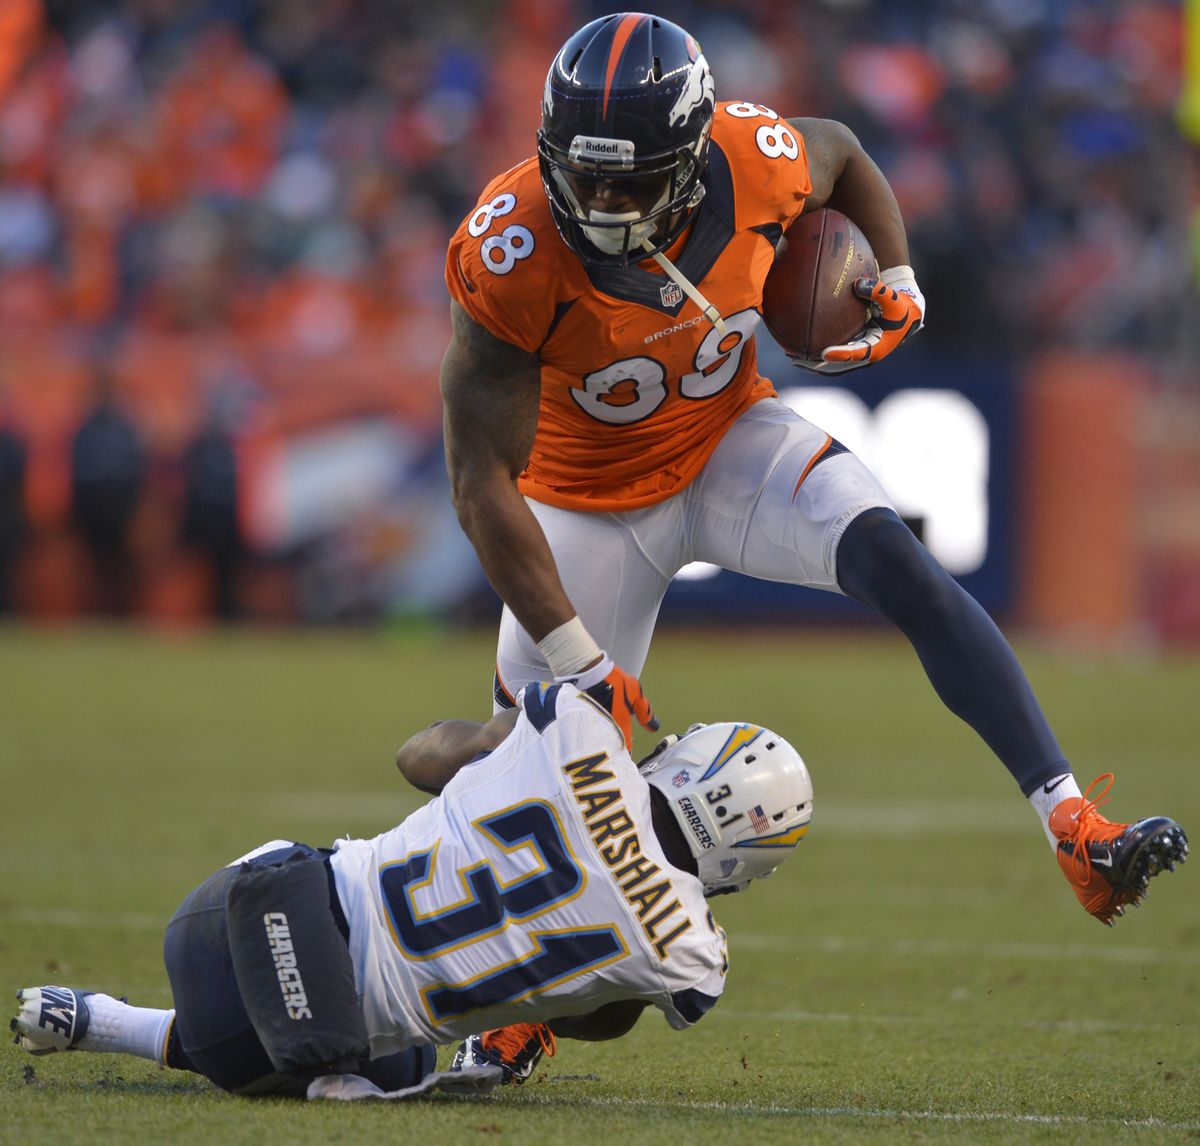 Broncos wide receiver Demaryius Thomas steps over Chargers cornerback Richard Marshall. (Associated Press)